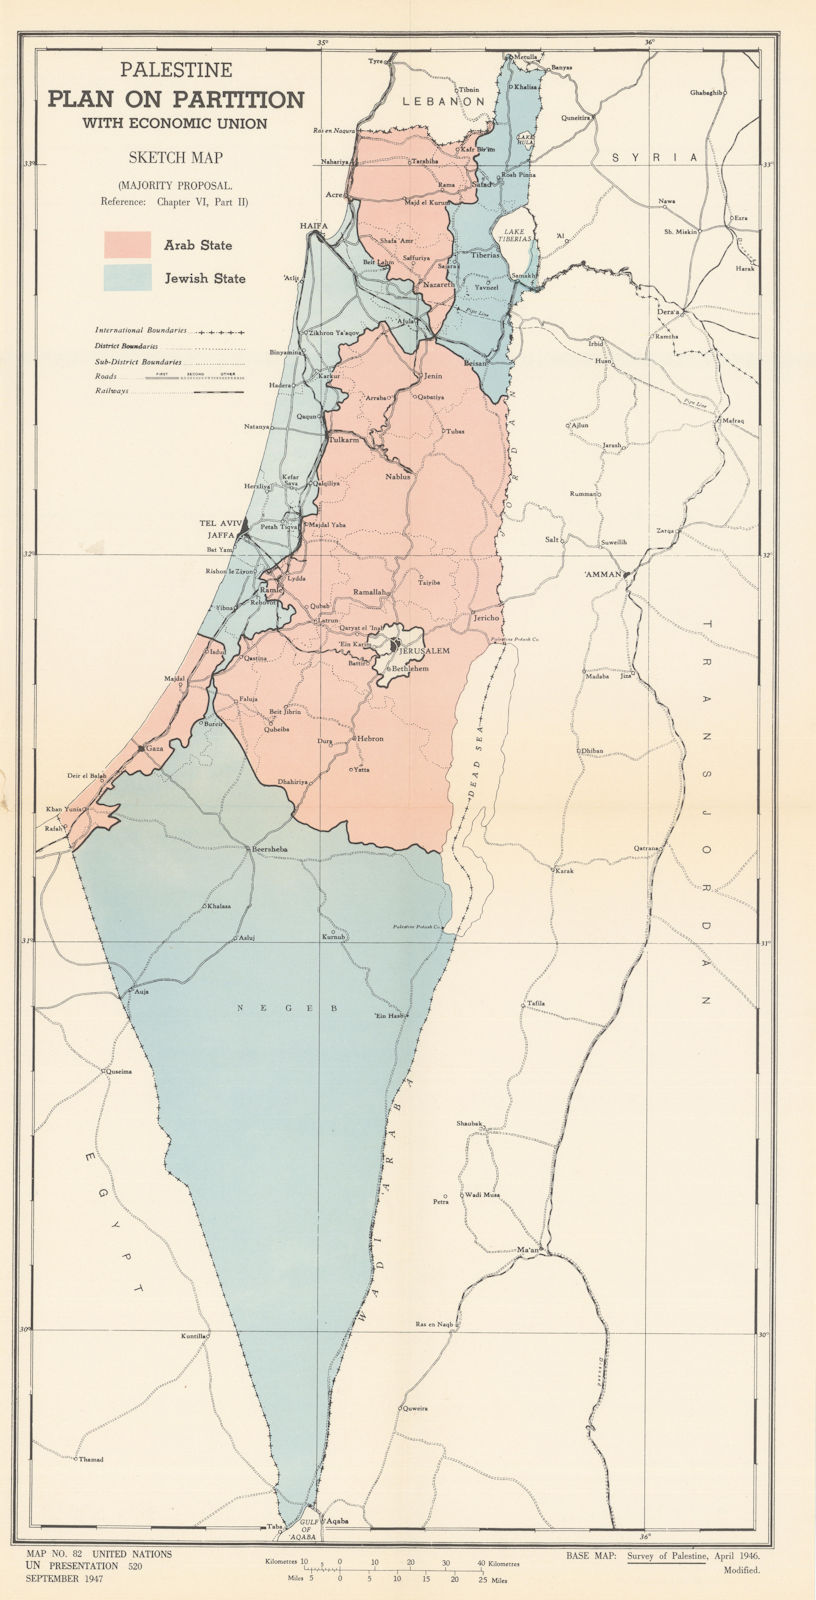 Palestine Plan on Partition with Economic Union. United Nations UNSCOP 1947 map